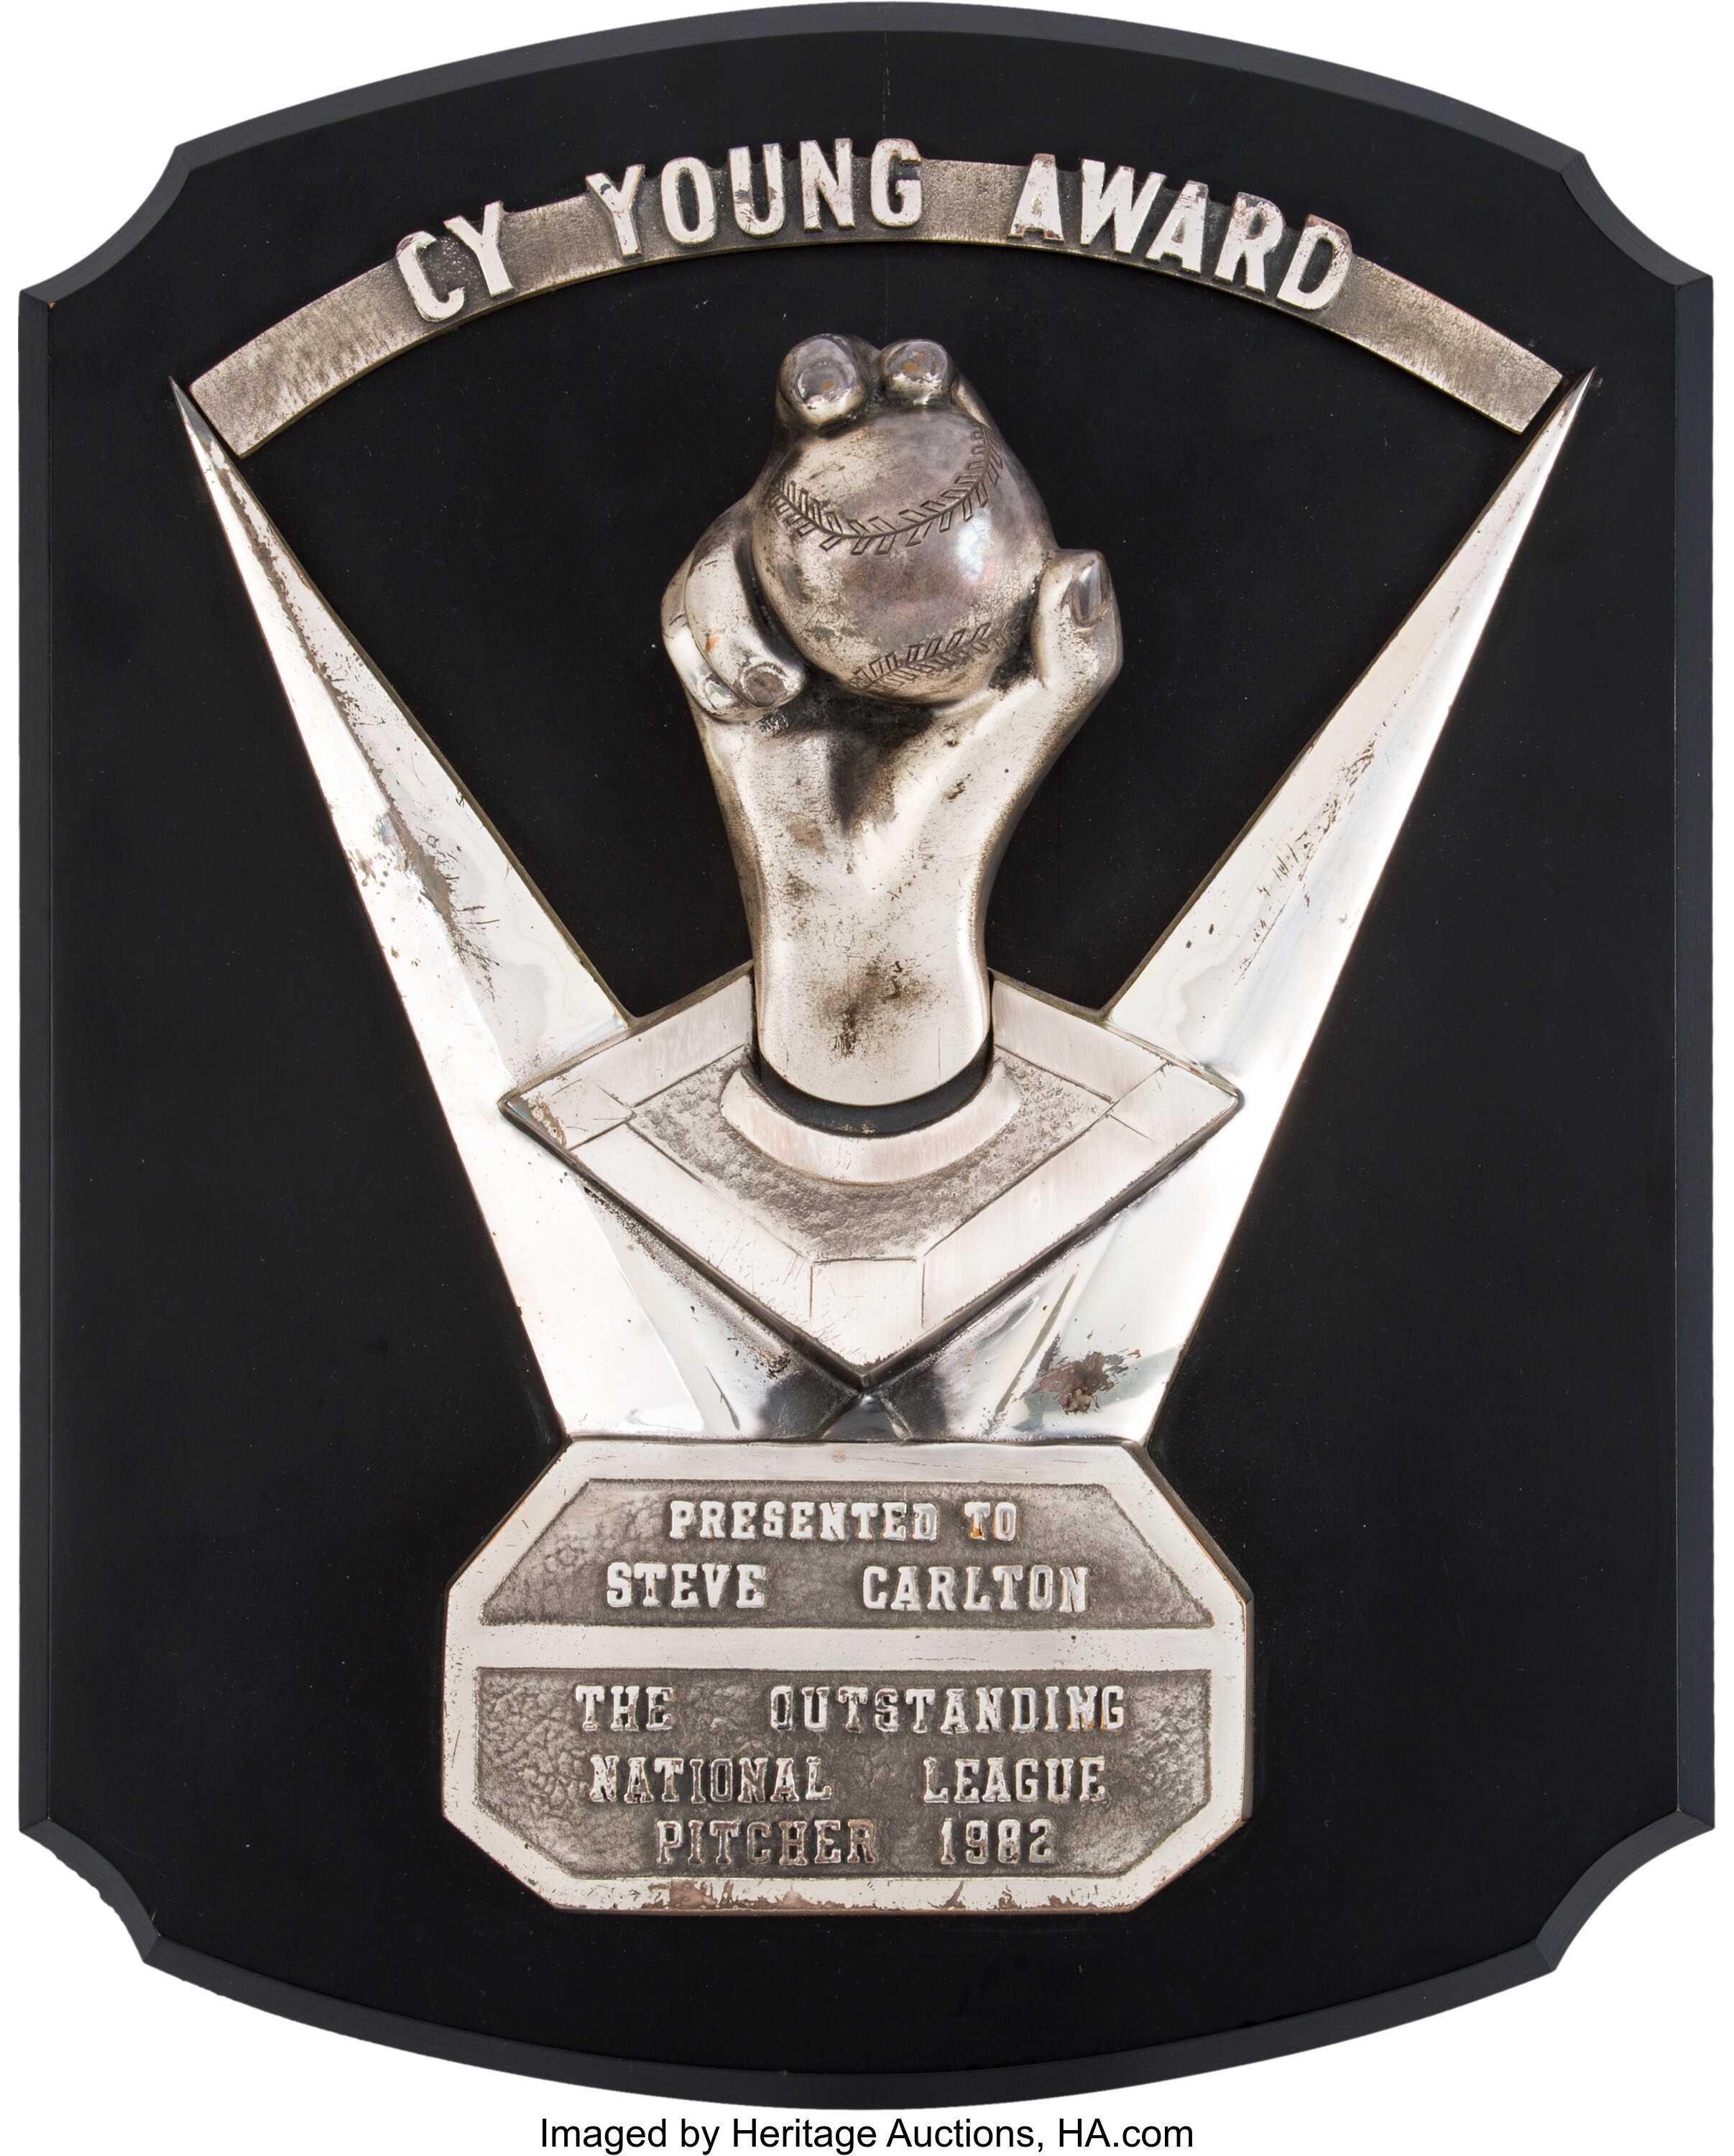 1982 National League Cy Young Award Presented to Steve Carlton